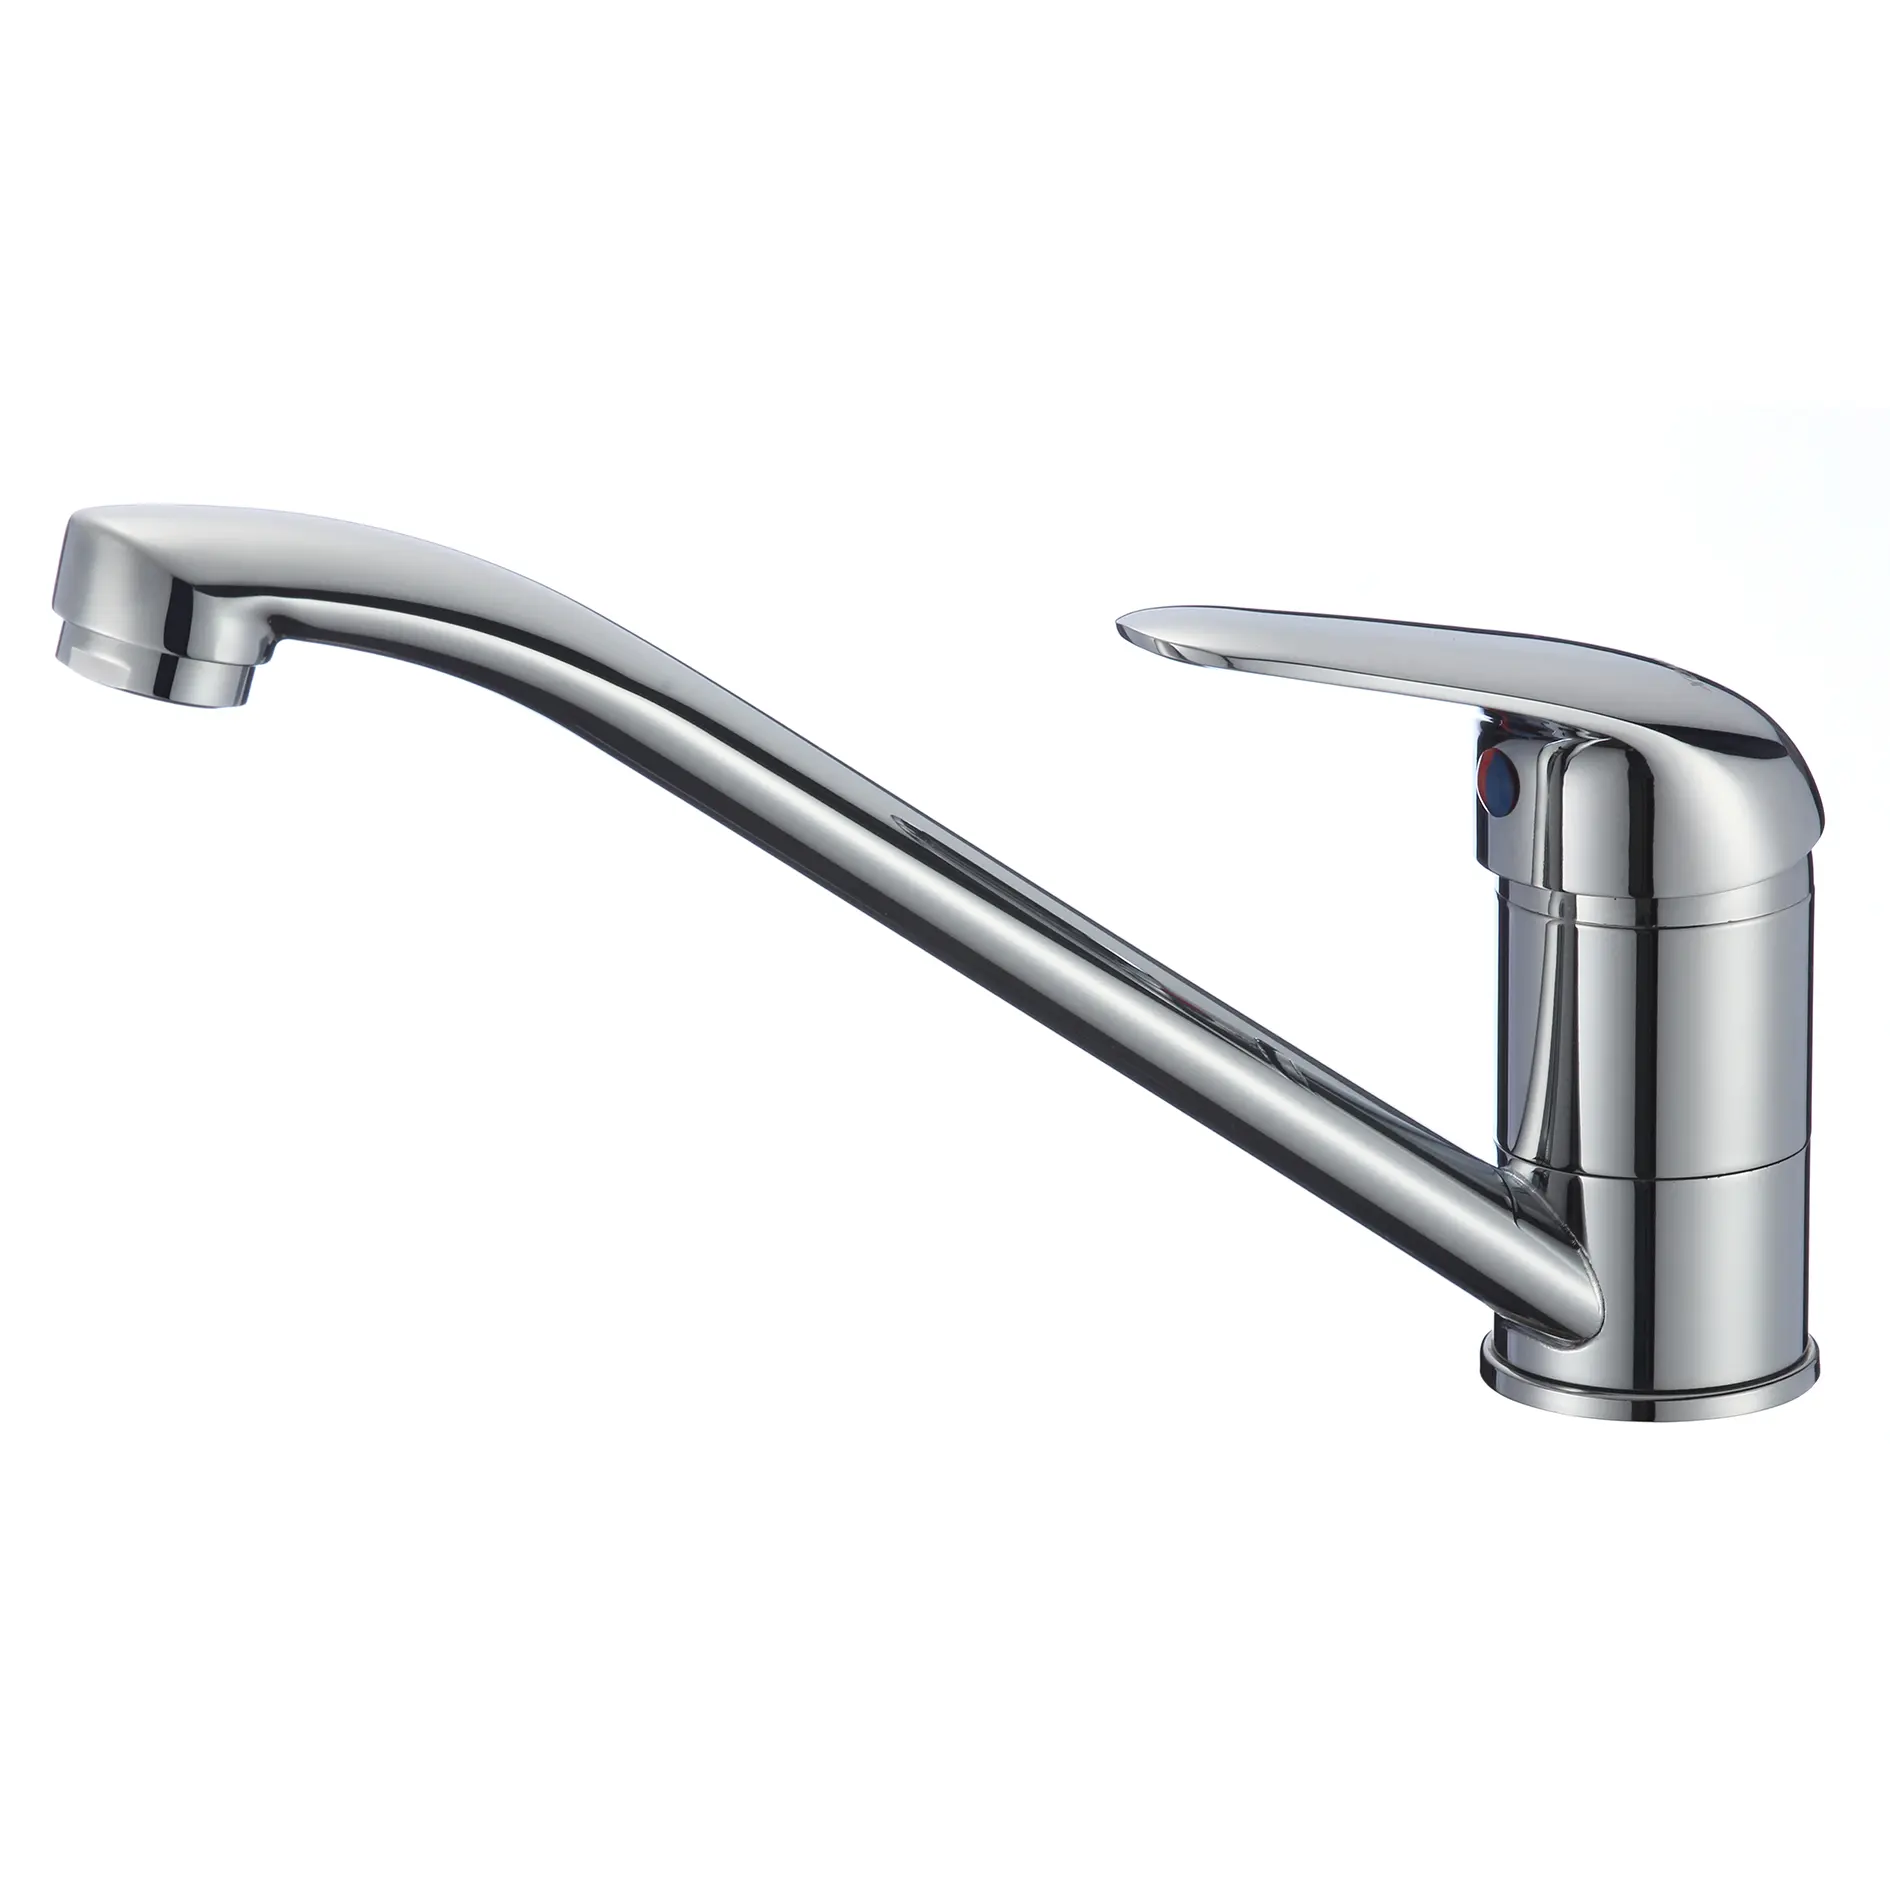 OEM Factory Copper Single Handle Cheap High Quality Hot Cold Water Kitchen Tap Mixer Chrome Brass Kitchen Sink Faucet